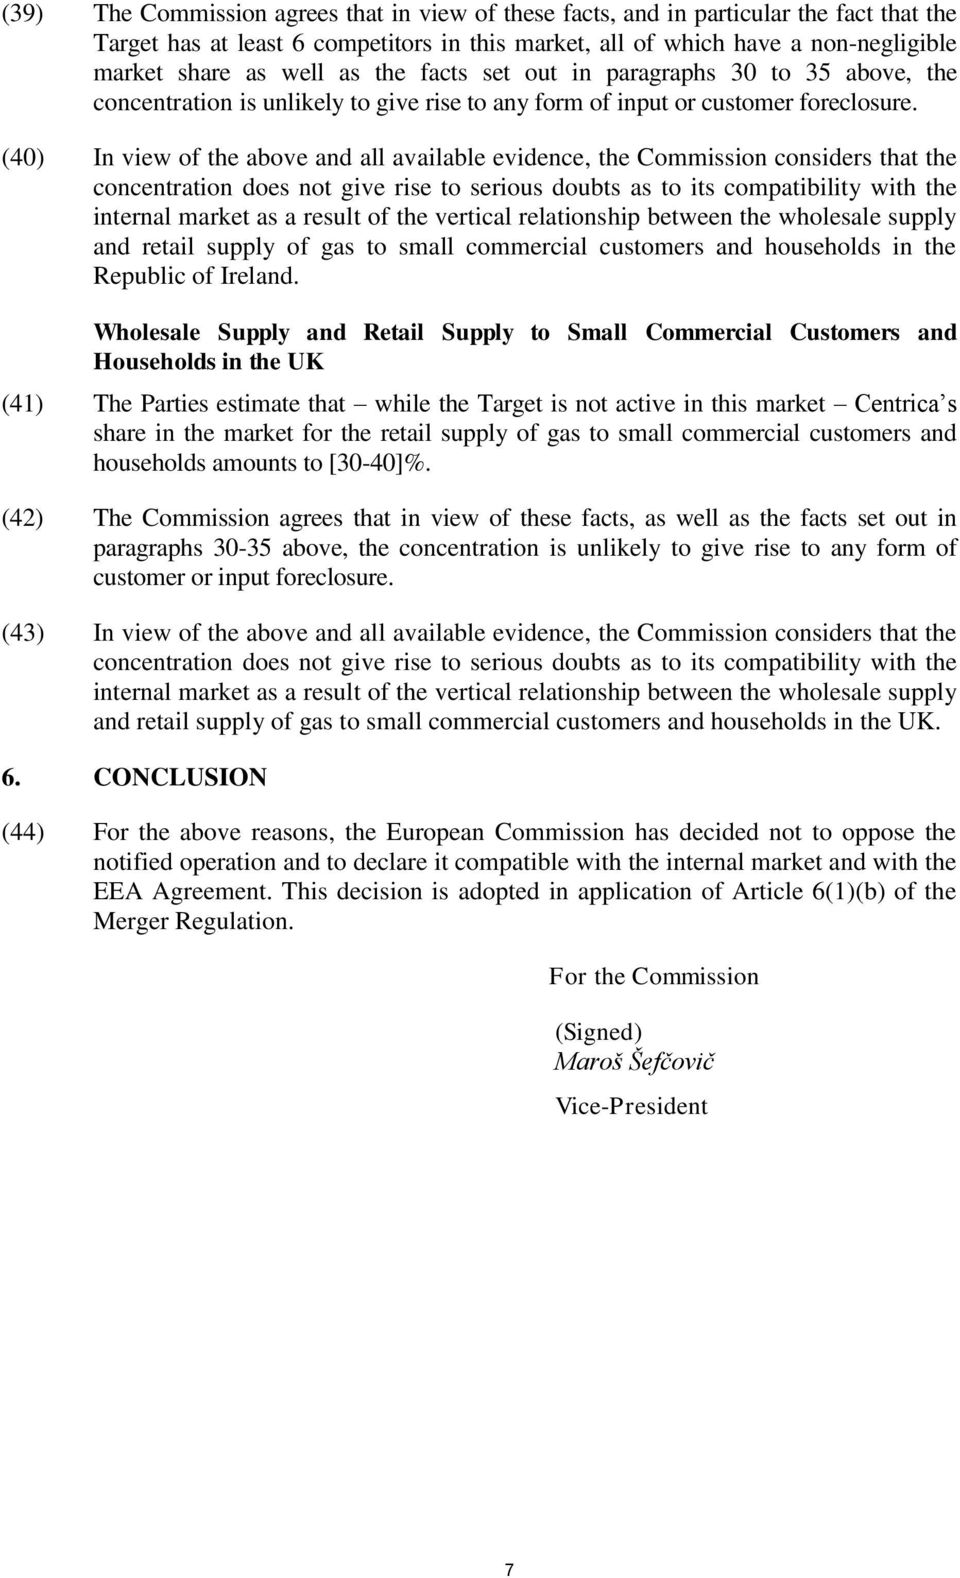 (40) In view of the above and all available evidence, the Commission considers that the concentration does not give rise to serious doubts as to its compatibility with the internal market as a result